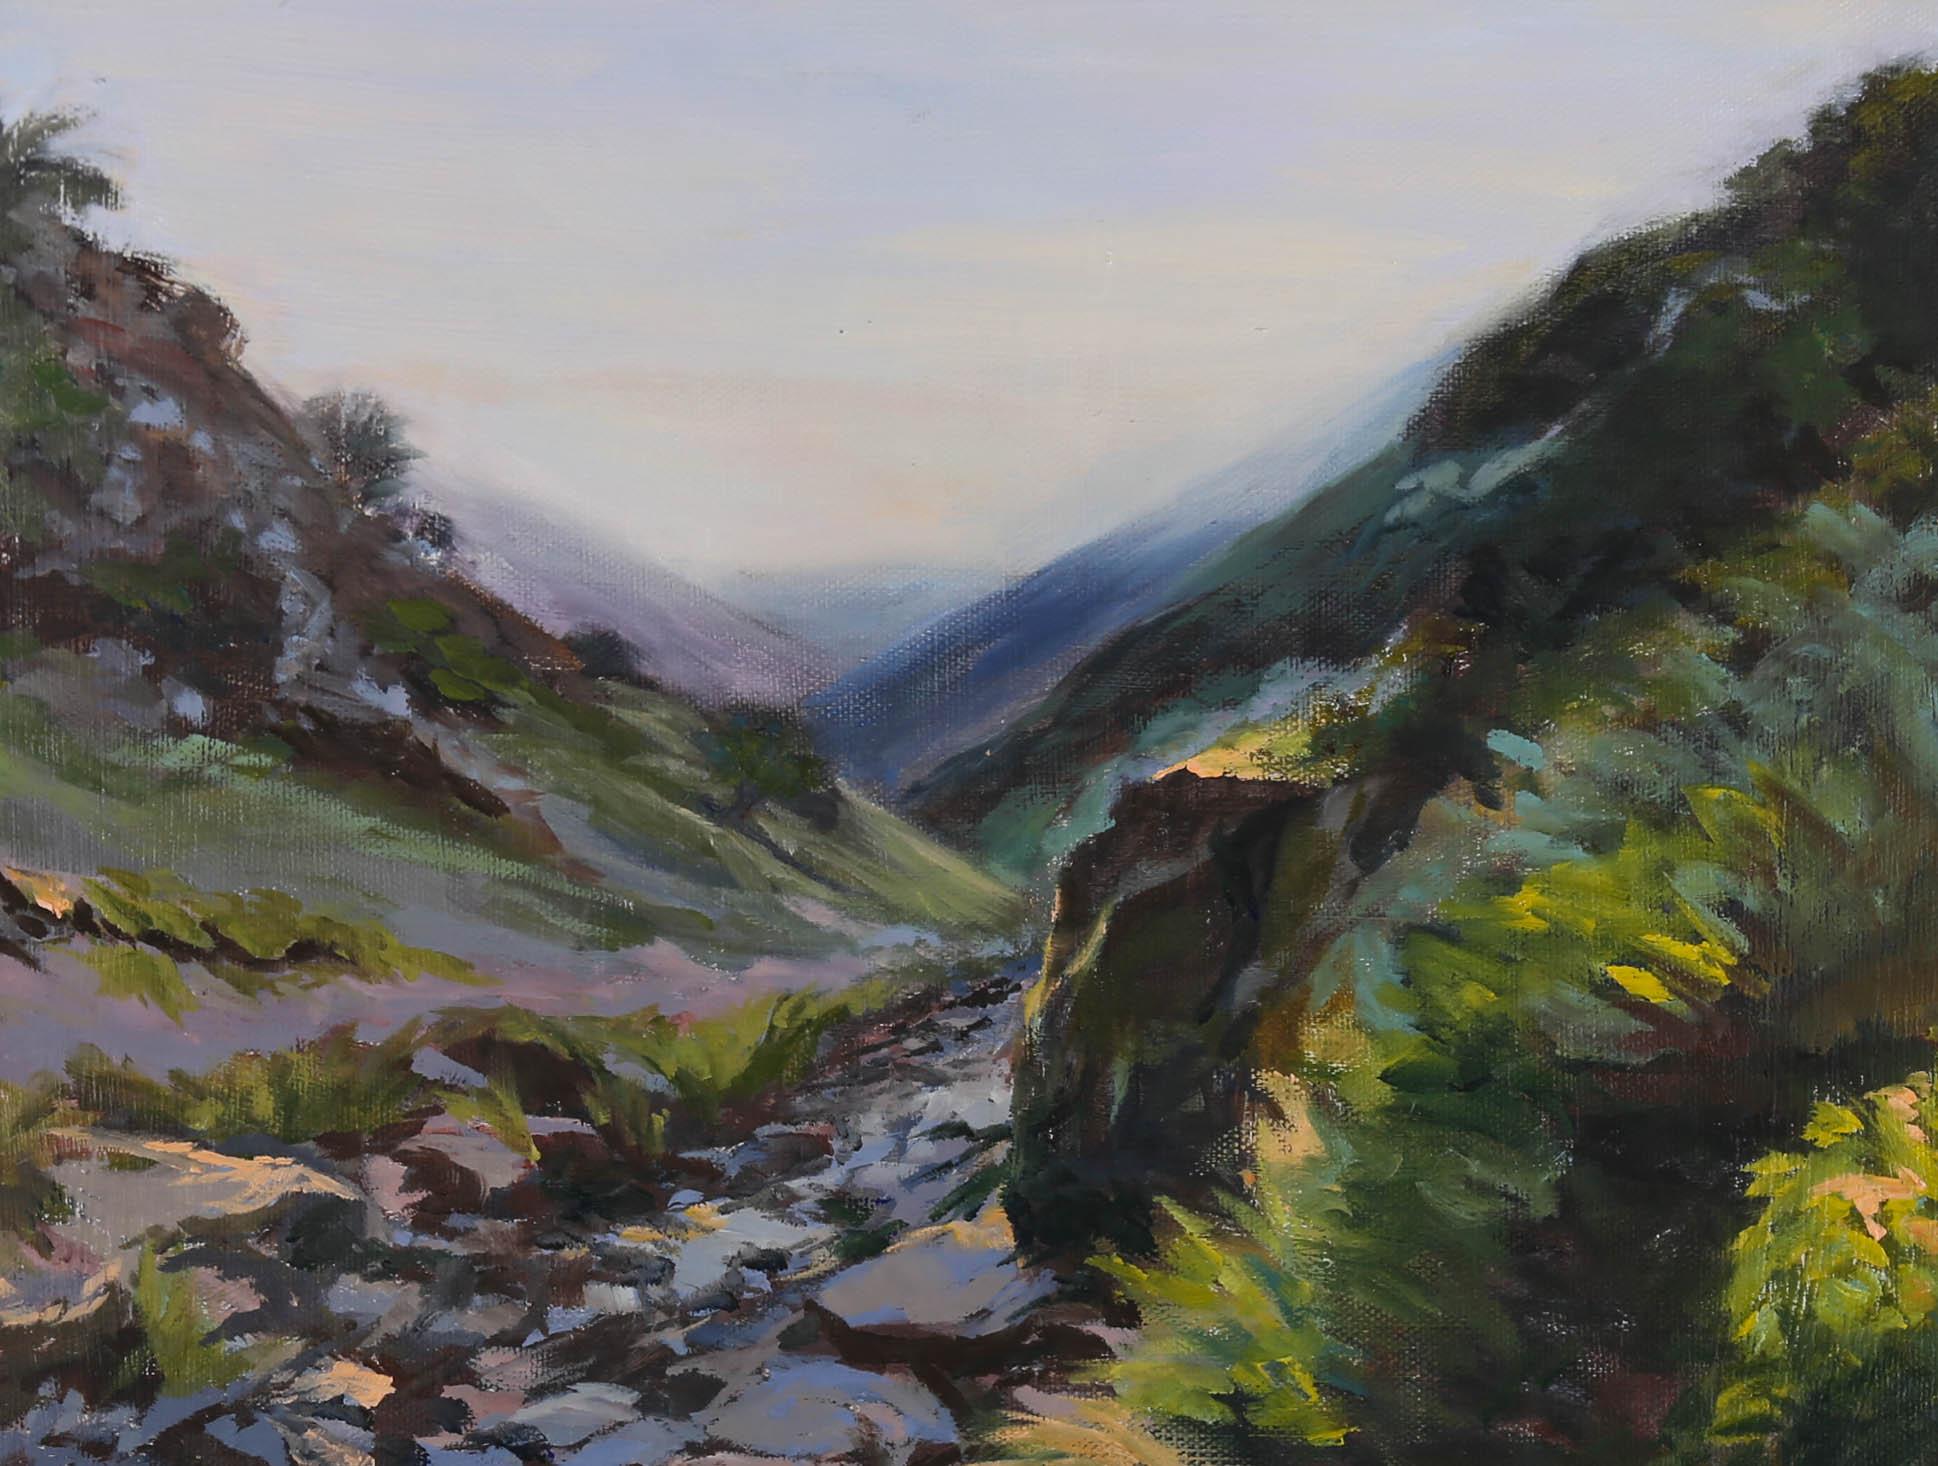 A contemporary composition by British artist Hilary Sinclair, depicting a rugged Scottish valley overrun by heather and wild grasses. The artist's impressionistic style given the painting an overwhelming feeling of emptiness. Unsigned. On canvas on